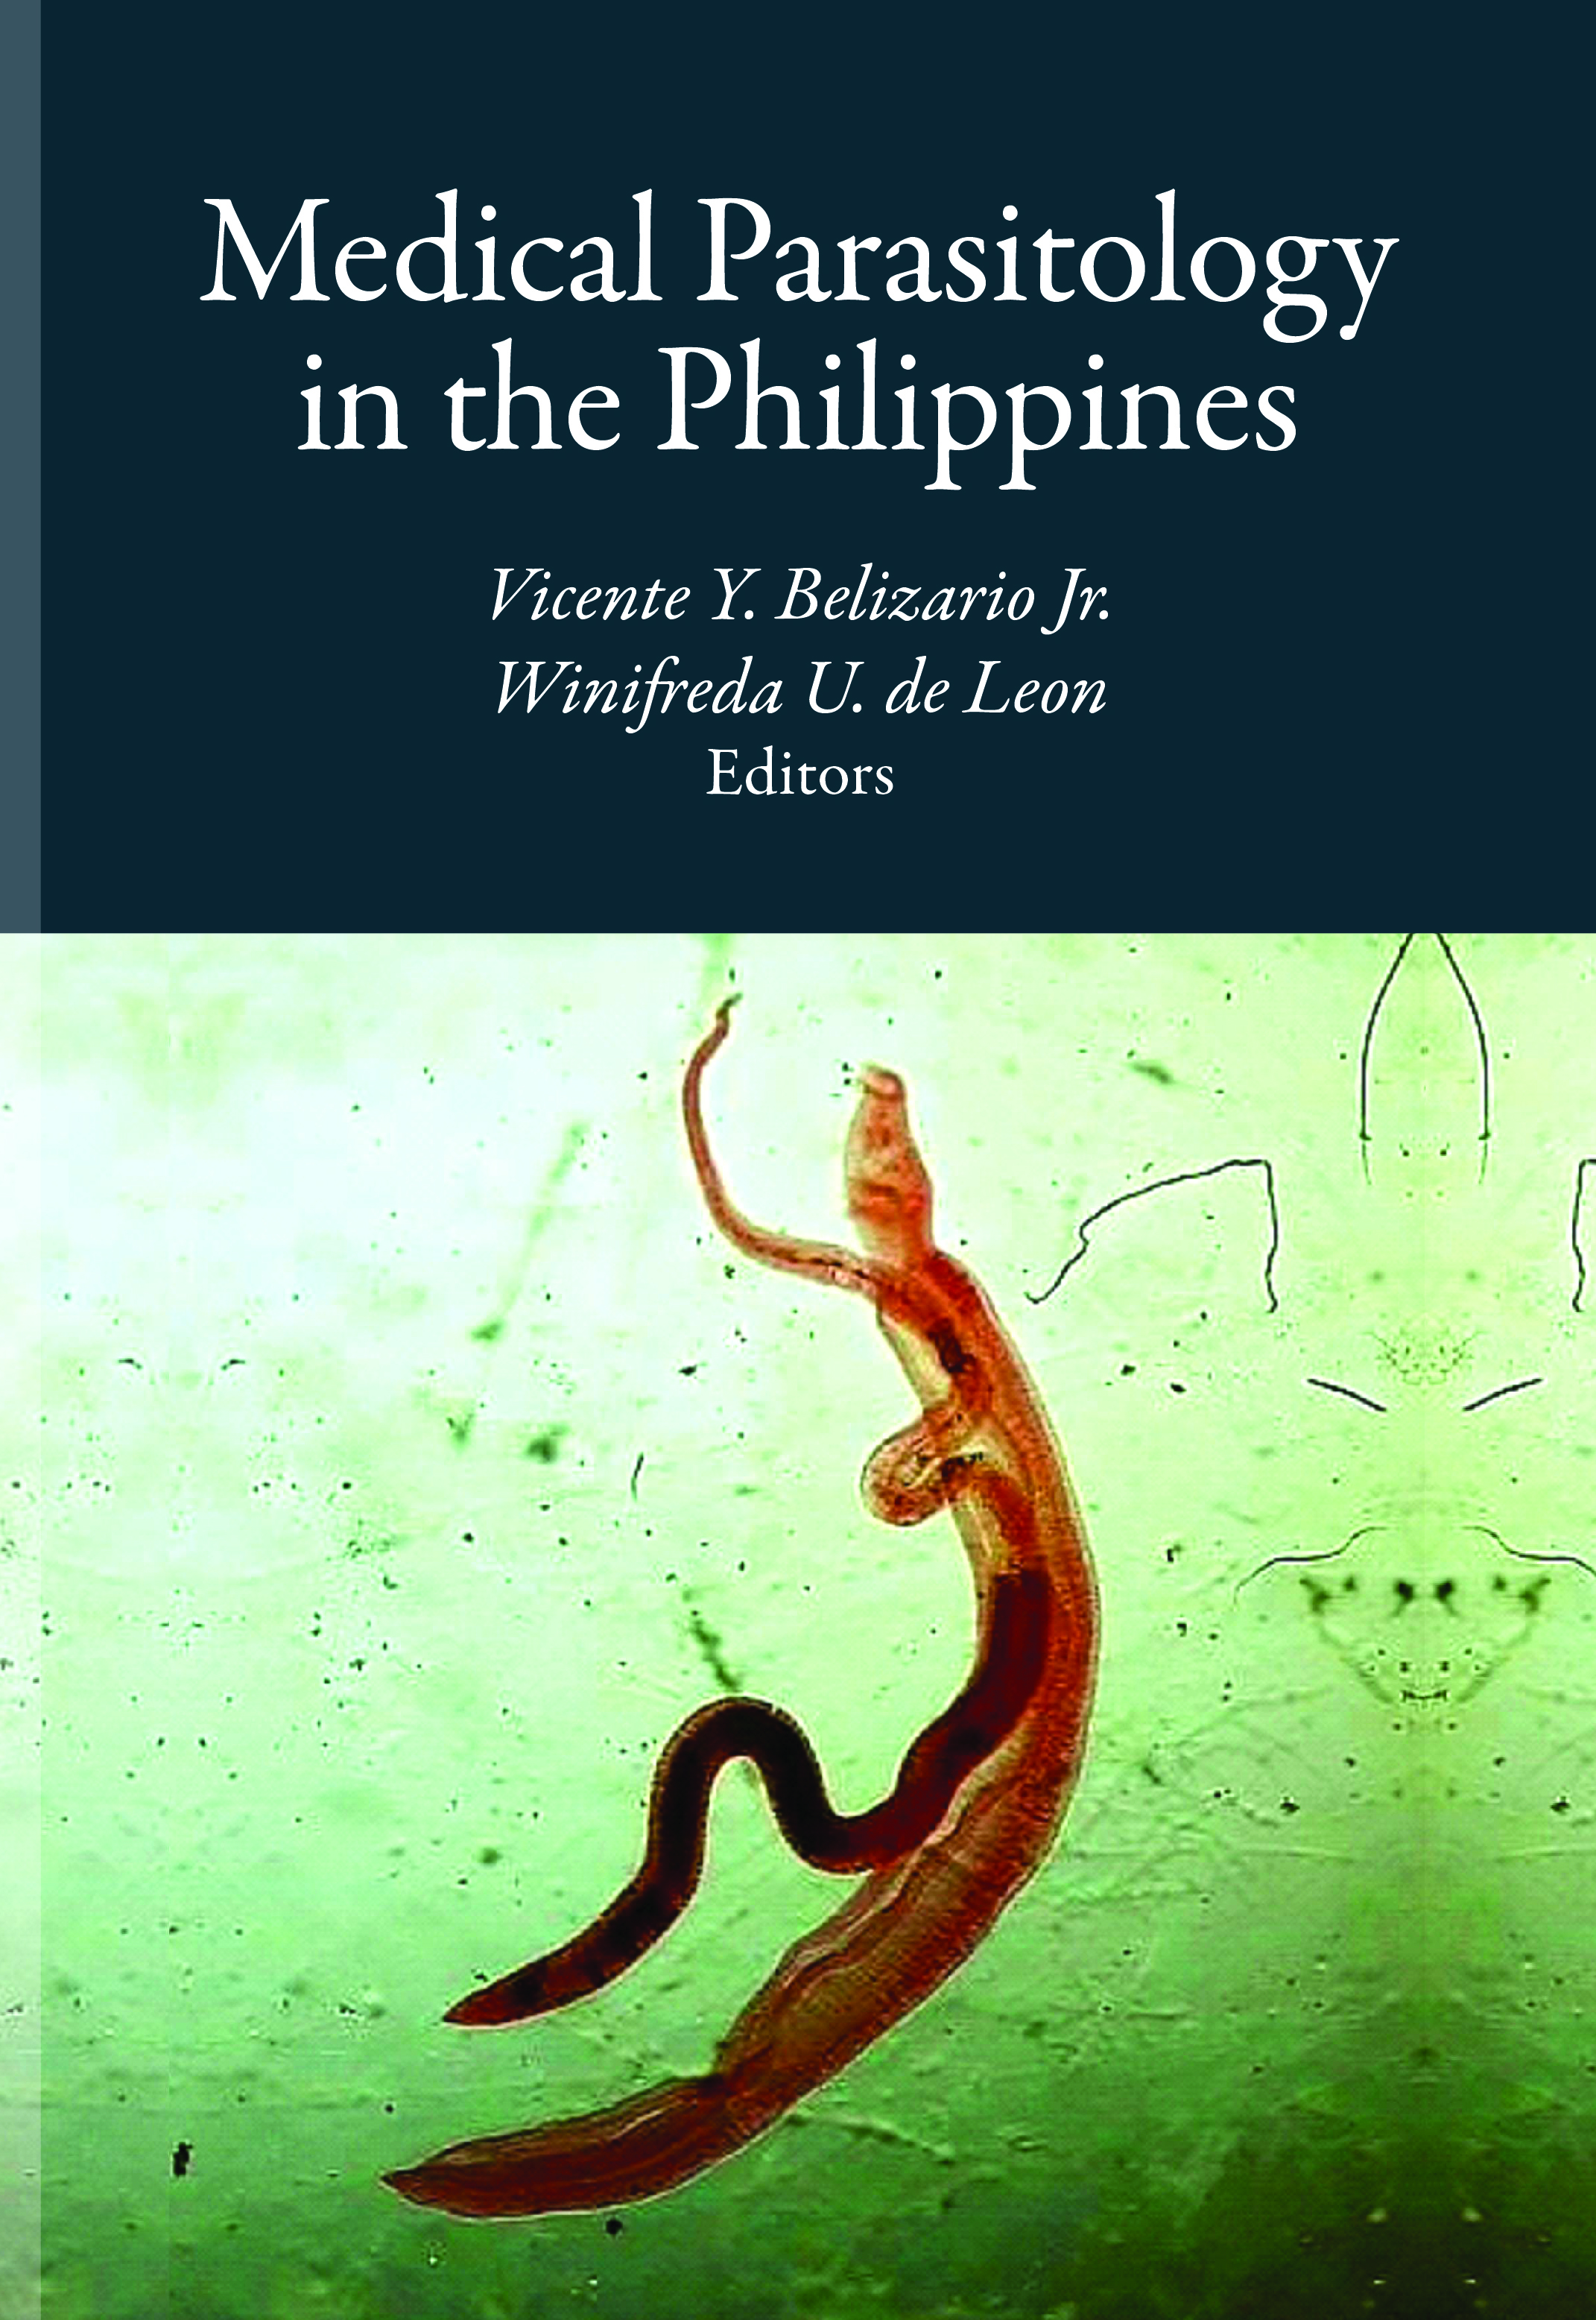 Medical Parasitology in the Philippines | University of the Philippines